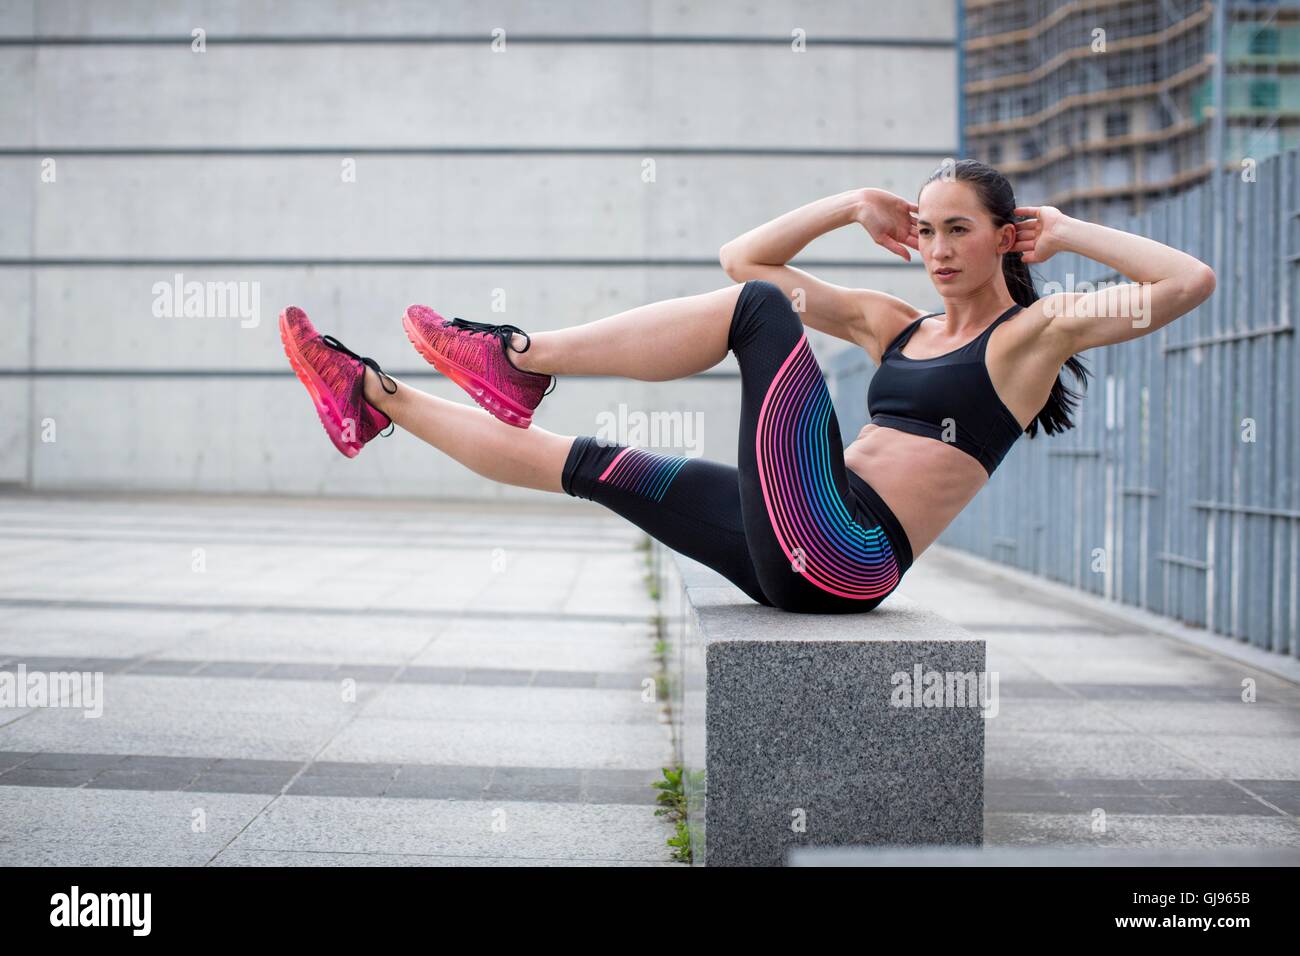 MODEL RELEASED. Young woman exercising on wall. Stock Photo